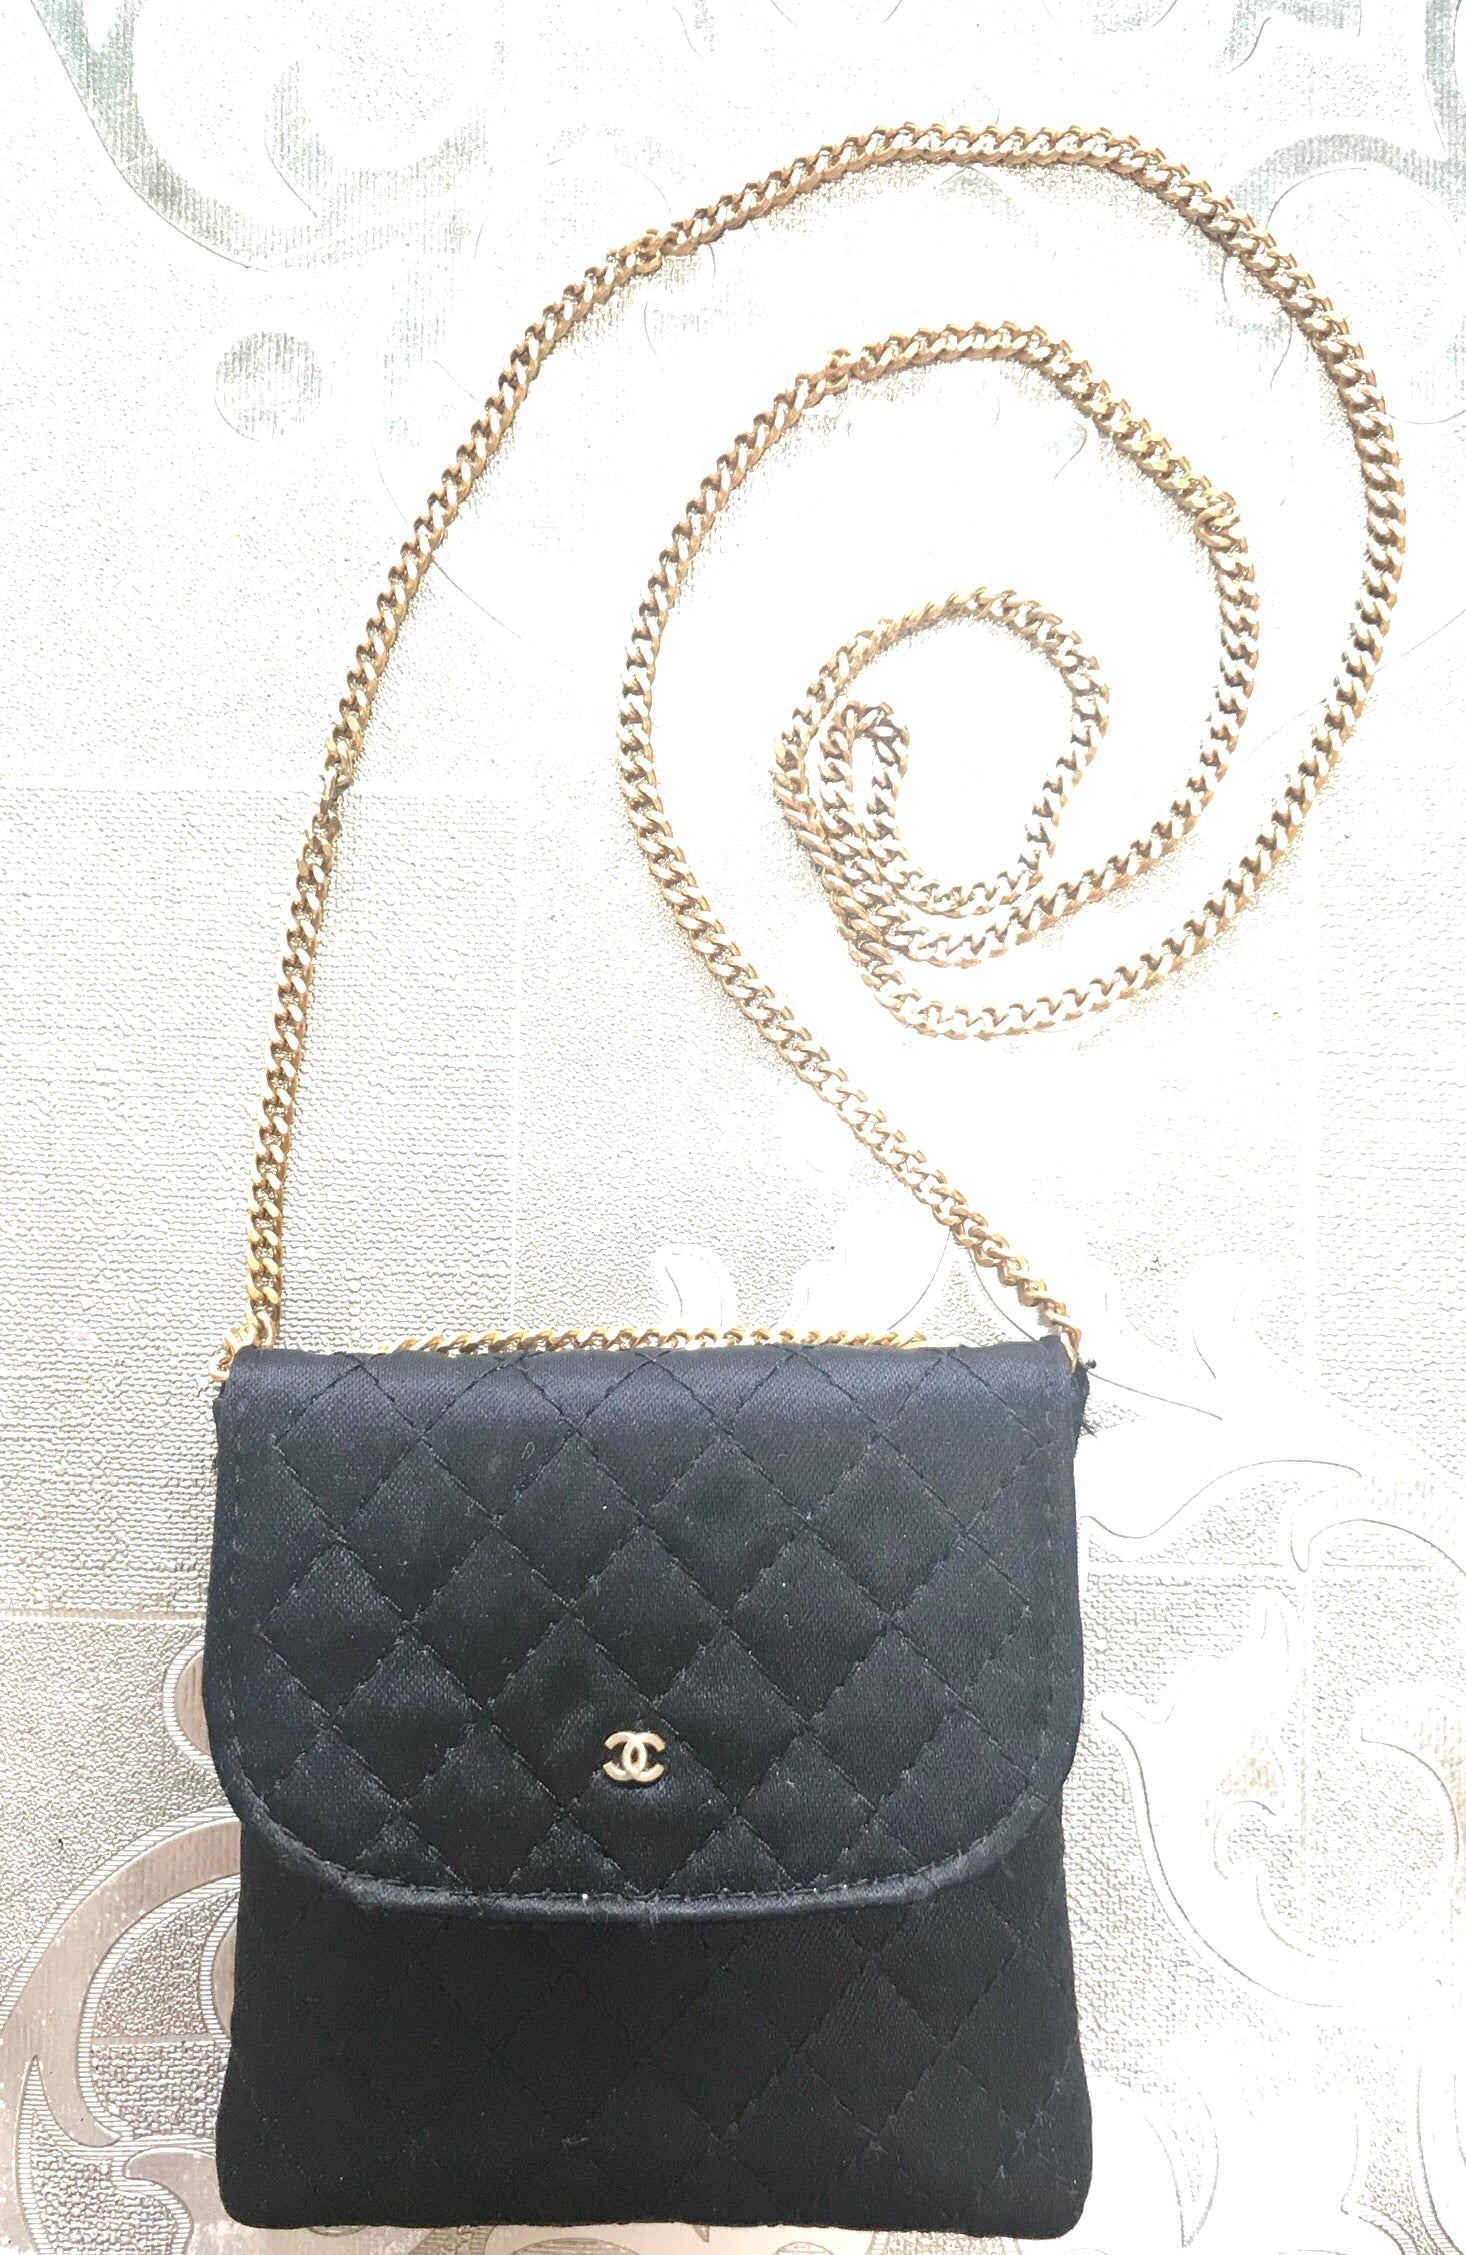 Vintage Chanel black quilted satin fabric mini pouch, coin purse